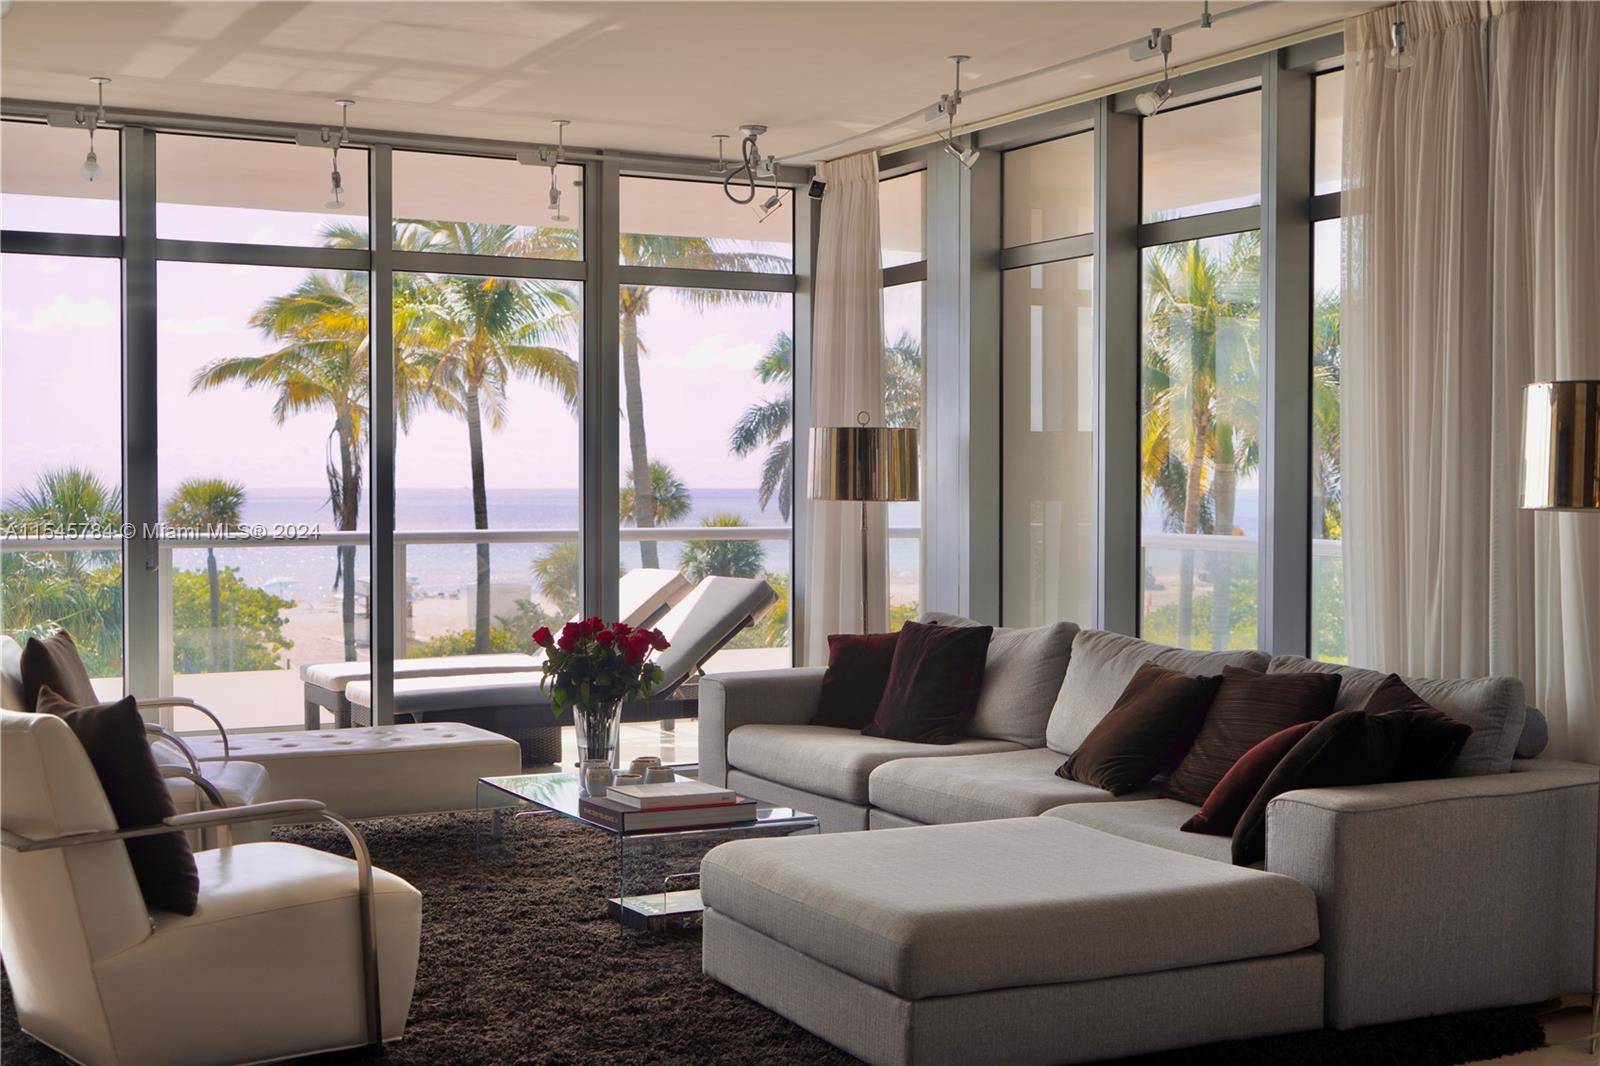 Fully furnished 3 bedrooms and 3 5 baths located in the Caribbean condominium.